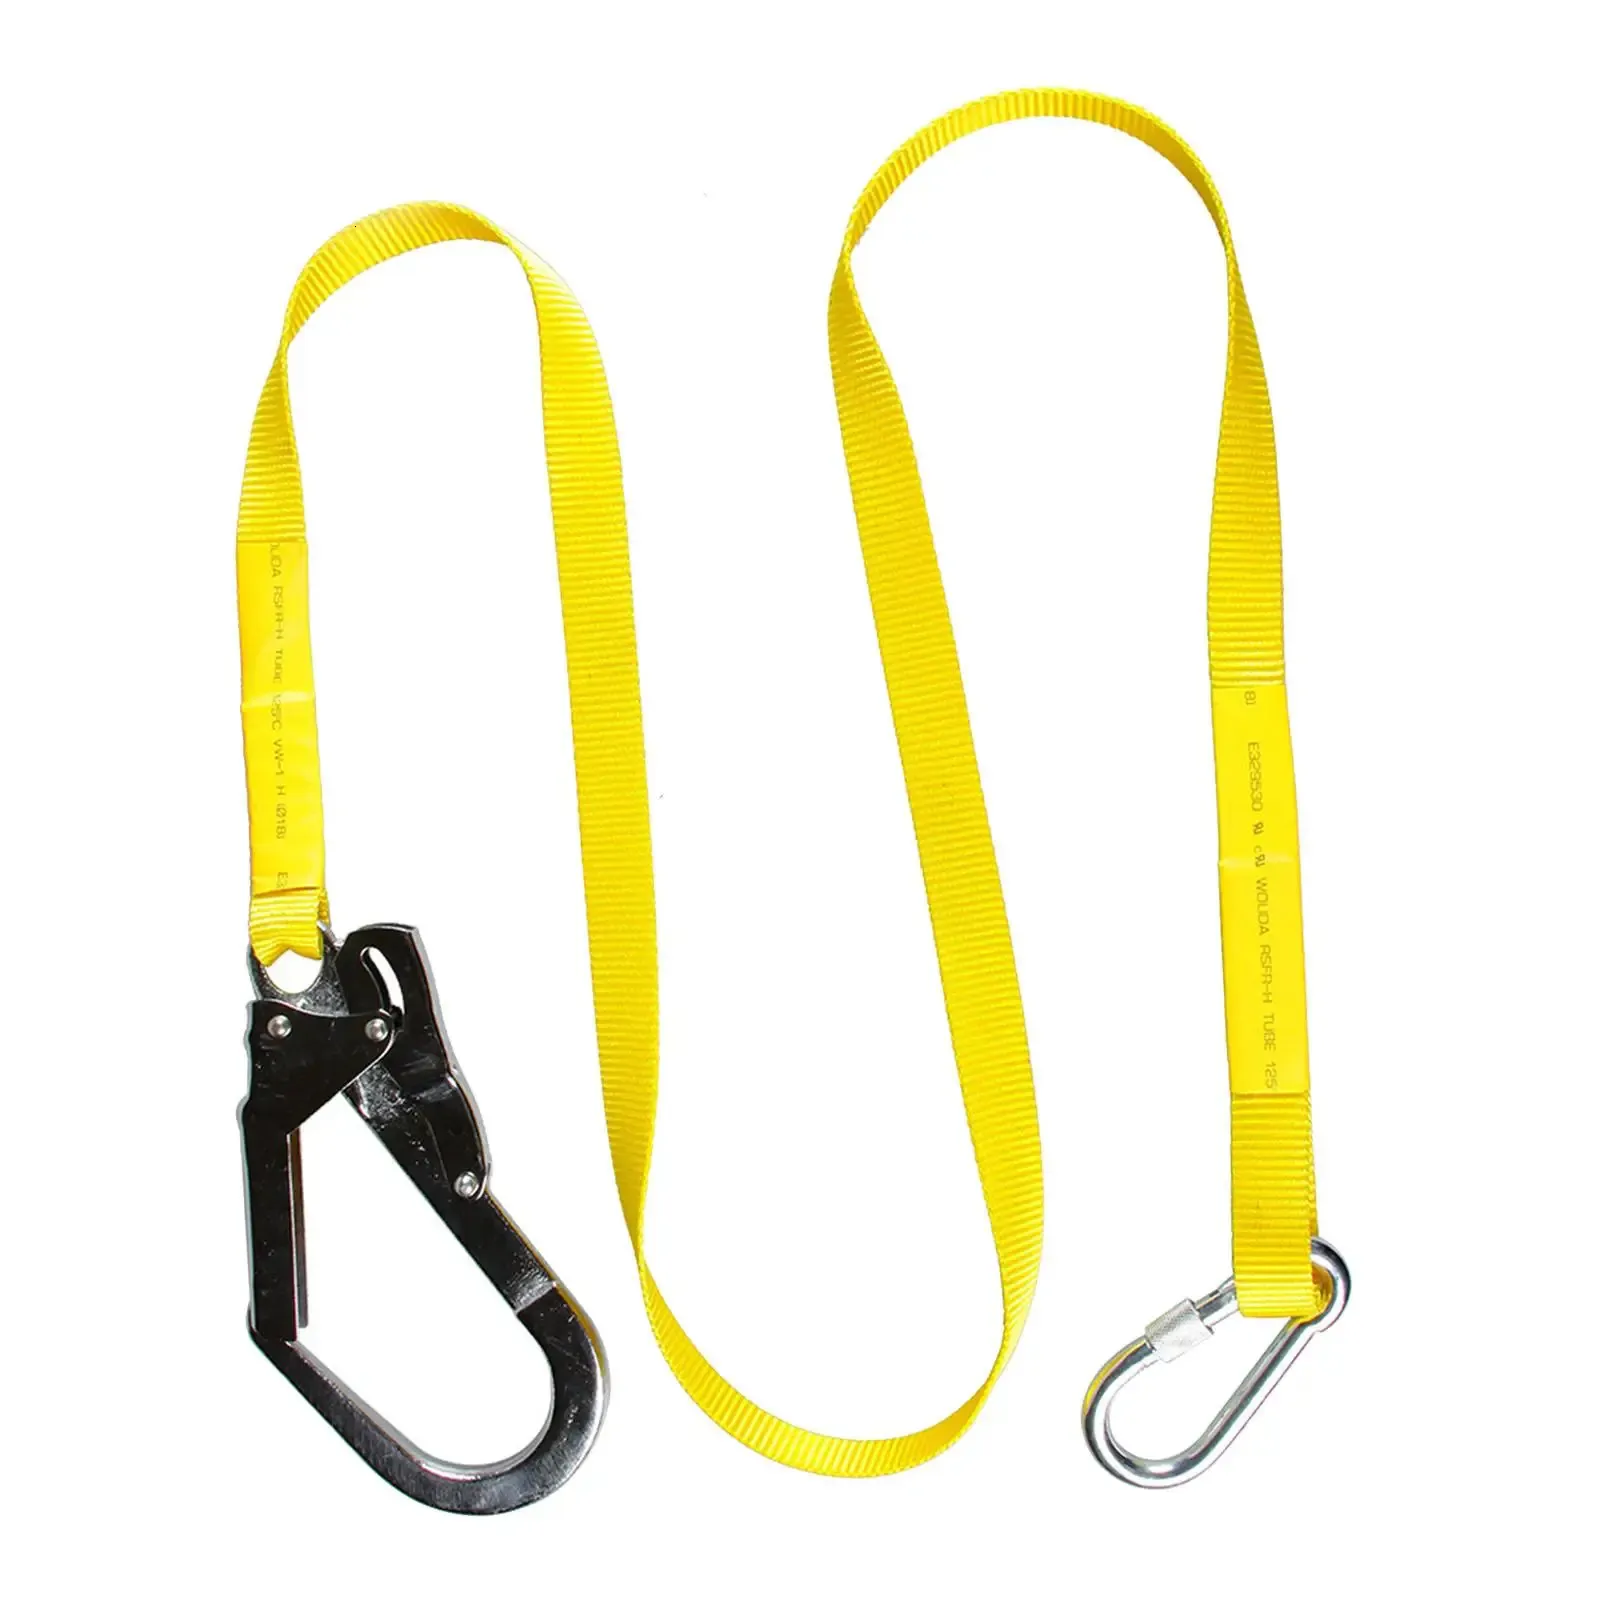 Flat Polyester Strap for Fall Protection Fall Protection Safety Harness Lanyard for Climbing Mountaineering Outdoor Activities